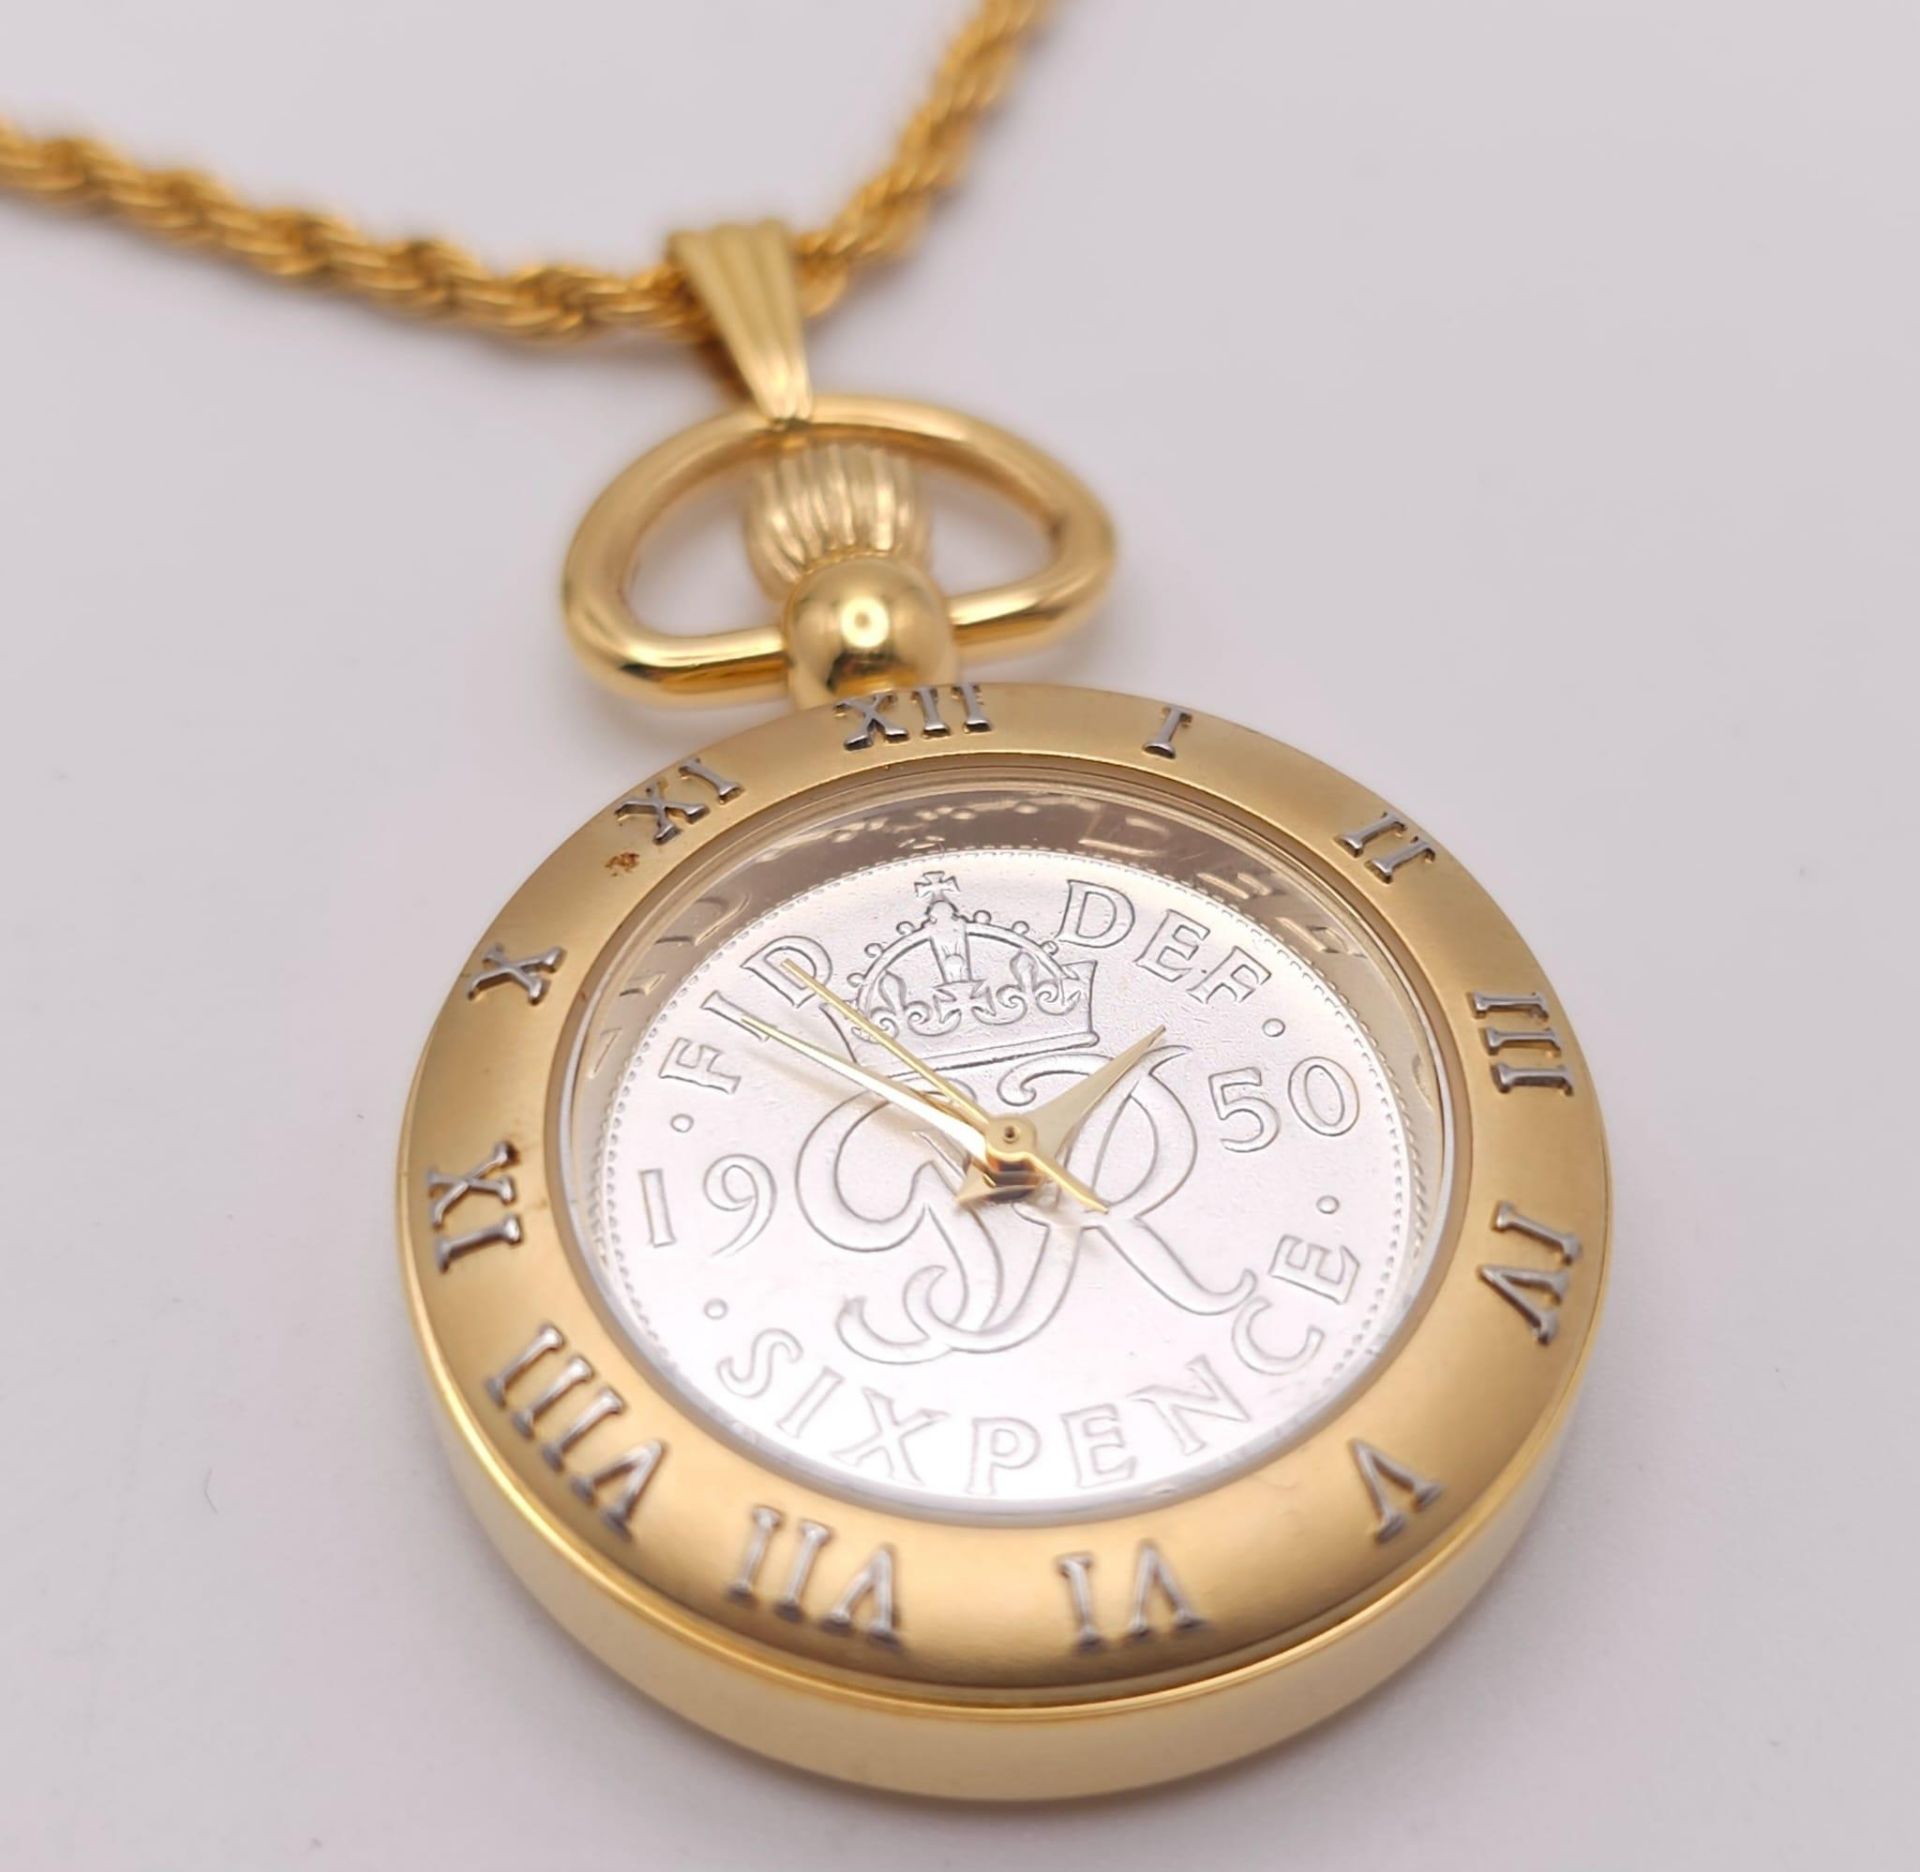 A BRAND NEW "COINWATCH" WITH 2 YEAR GUARANTEE . A PENDANT WATCH WITH A GENUINE COIN AS THE DIAL , - Bild 4 aus 18